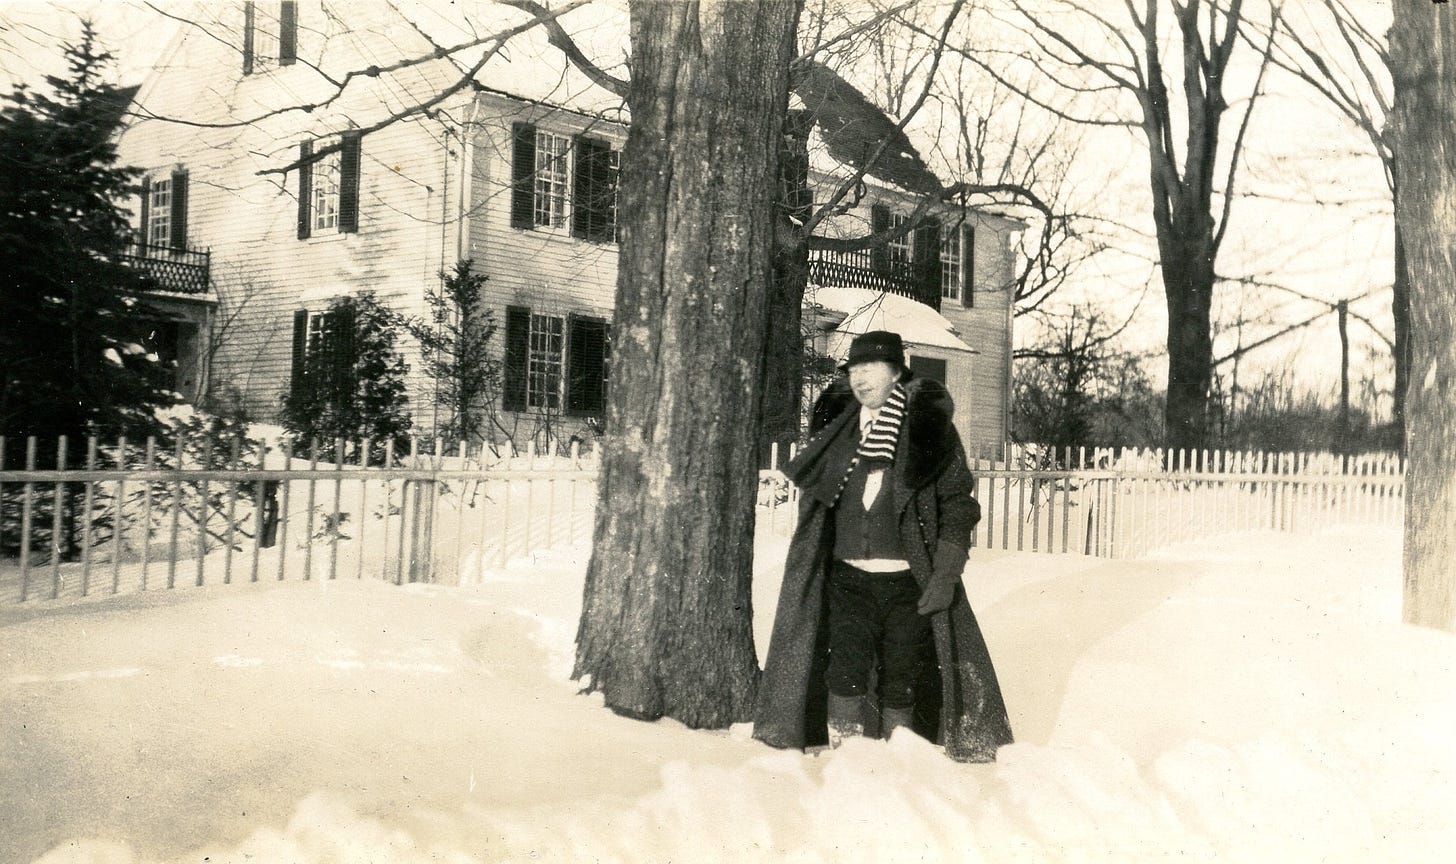 Lala Barr outside in snow